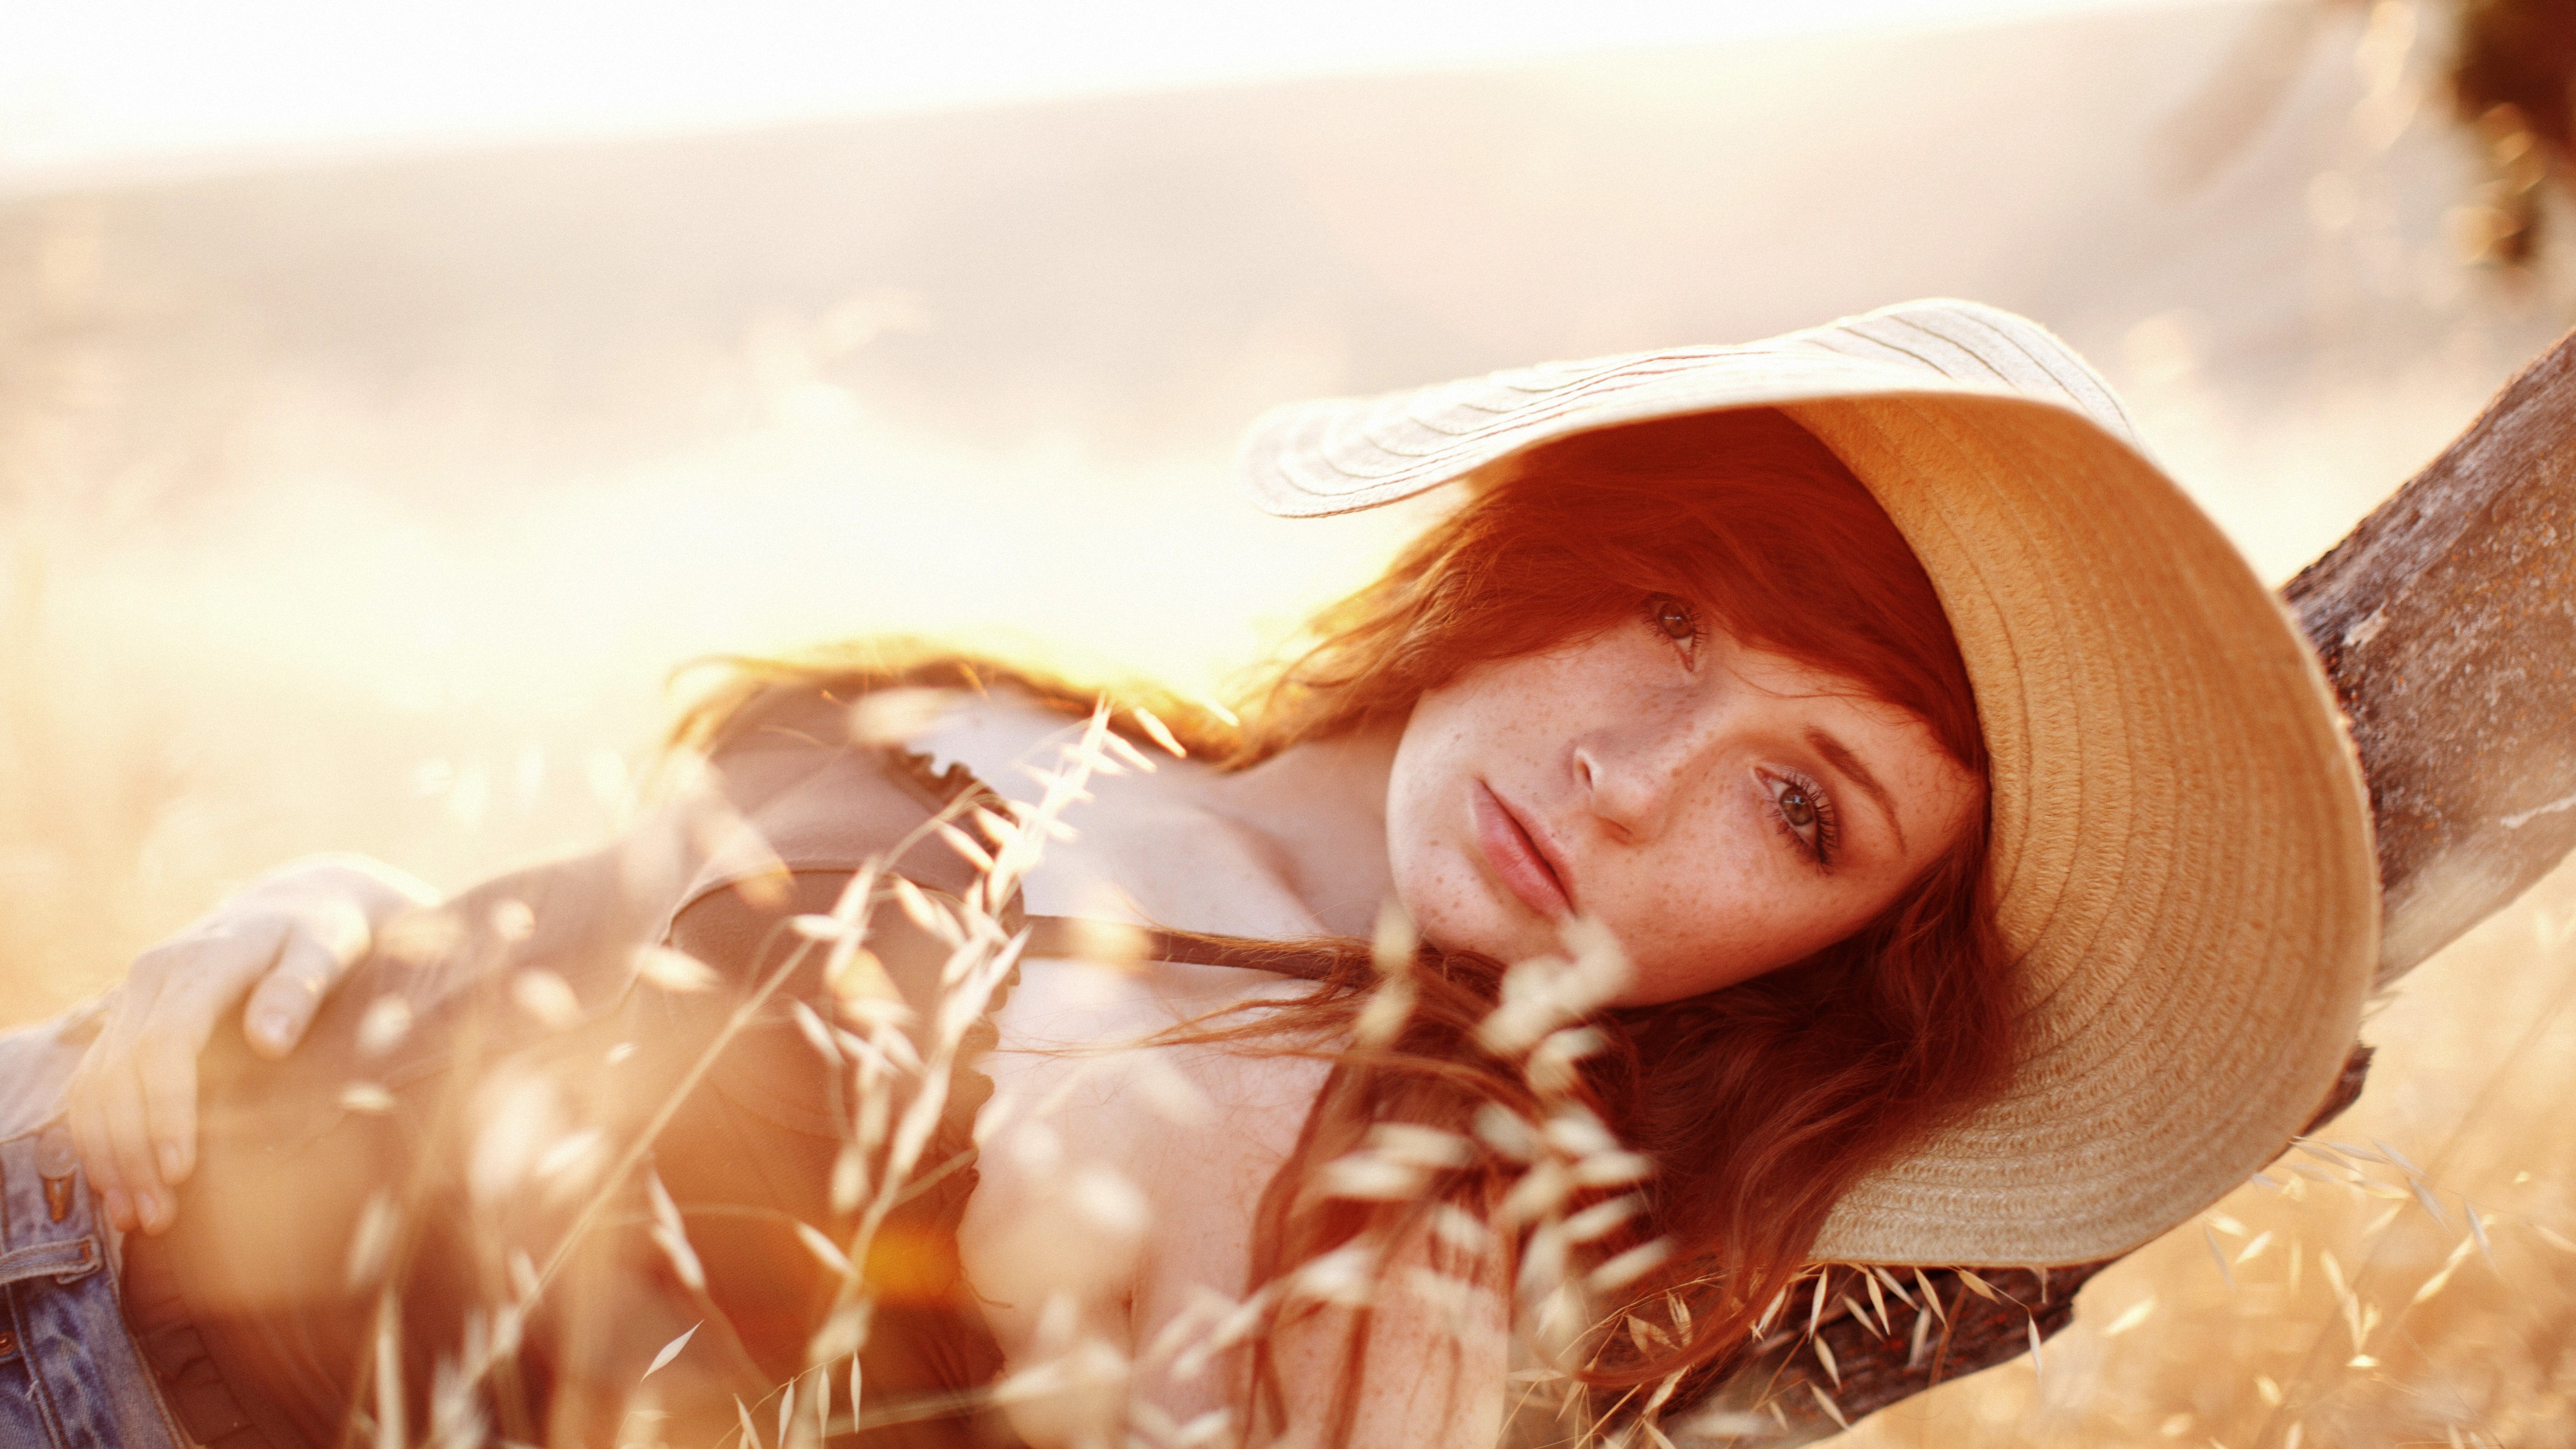 People 5616x3159 redhead hat lying on back women face freckles natural light model women outdoors sunlight women with hats looking at viewer